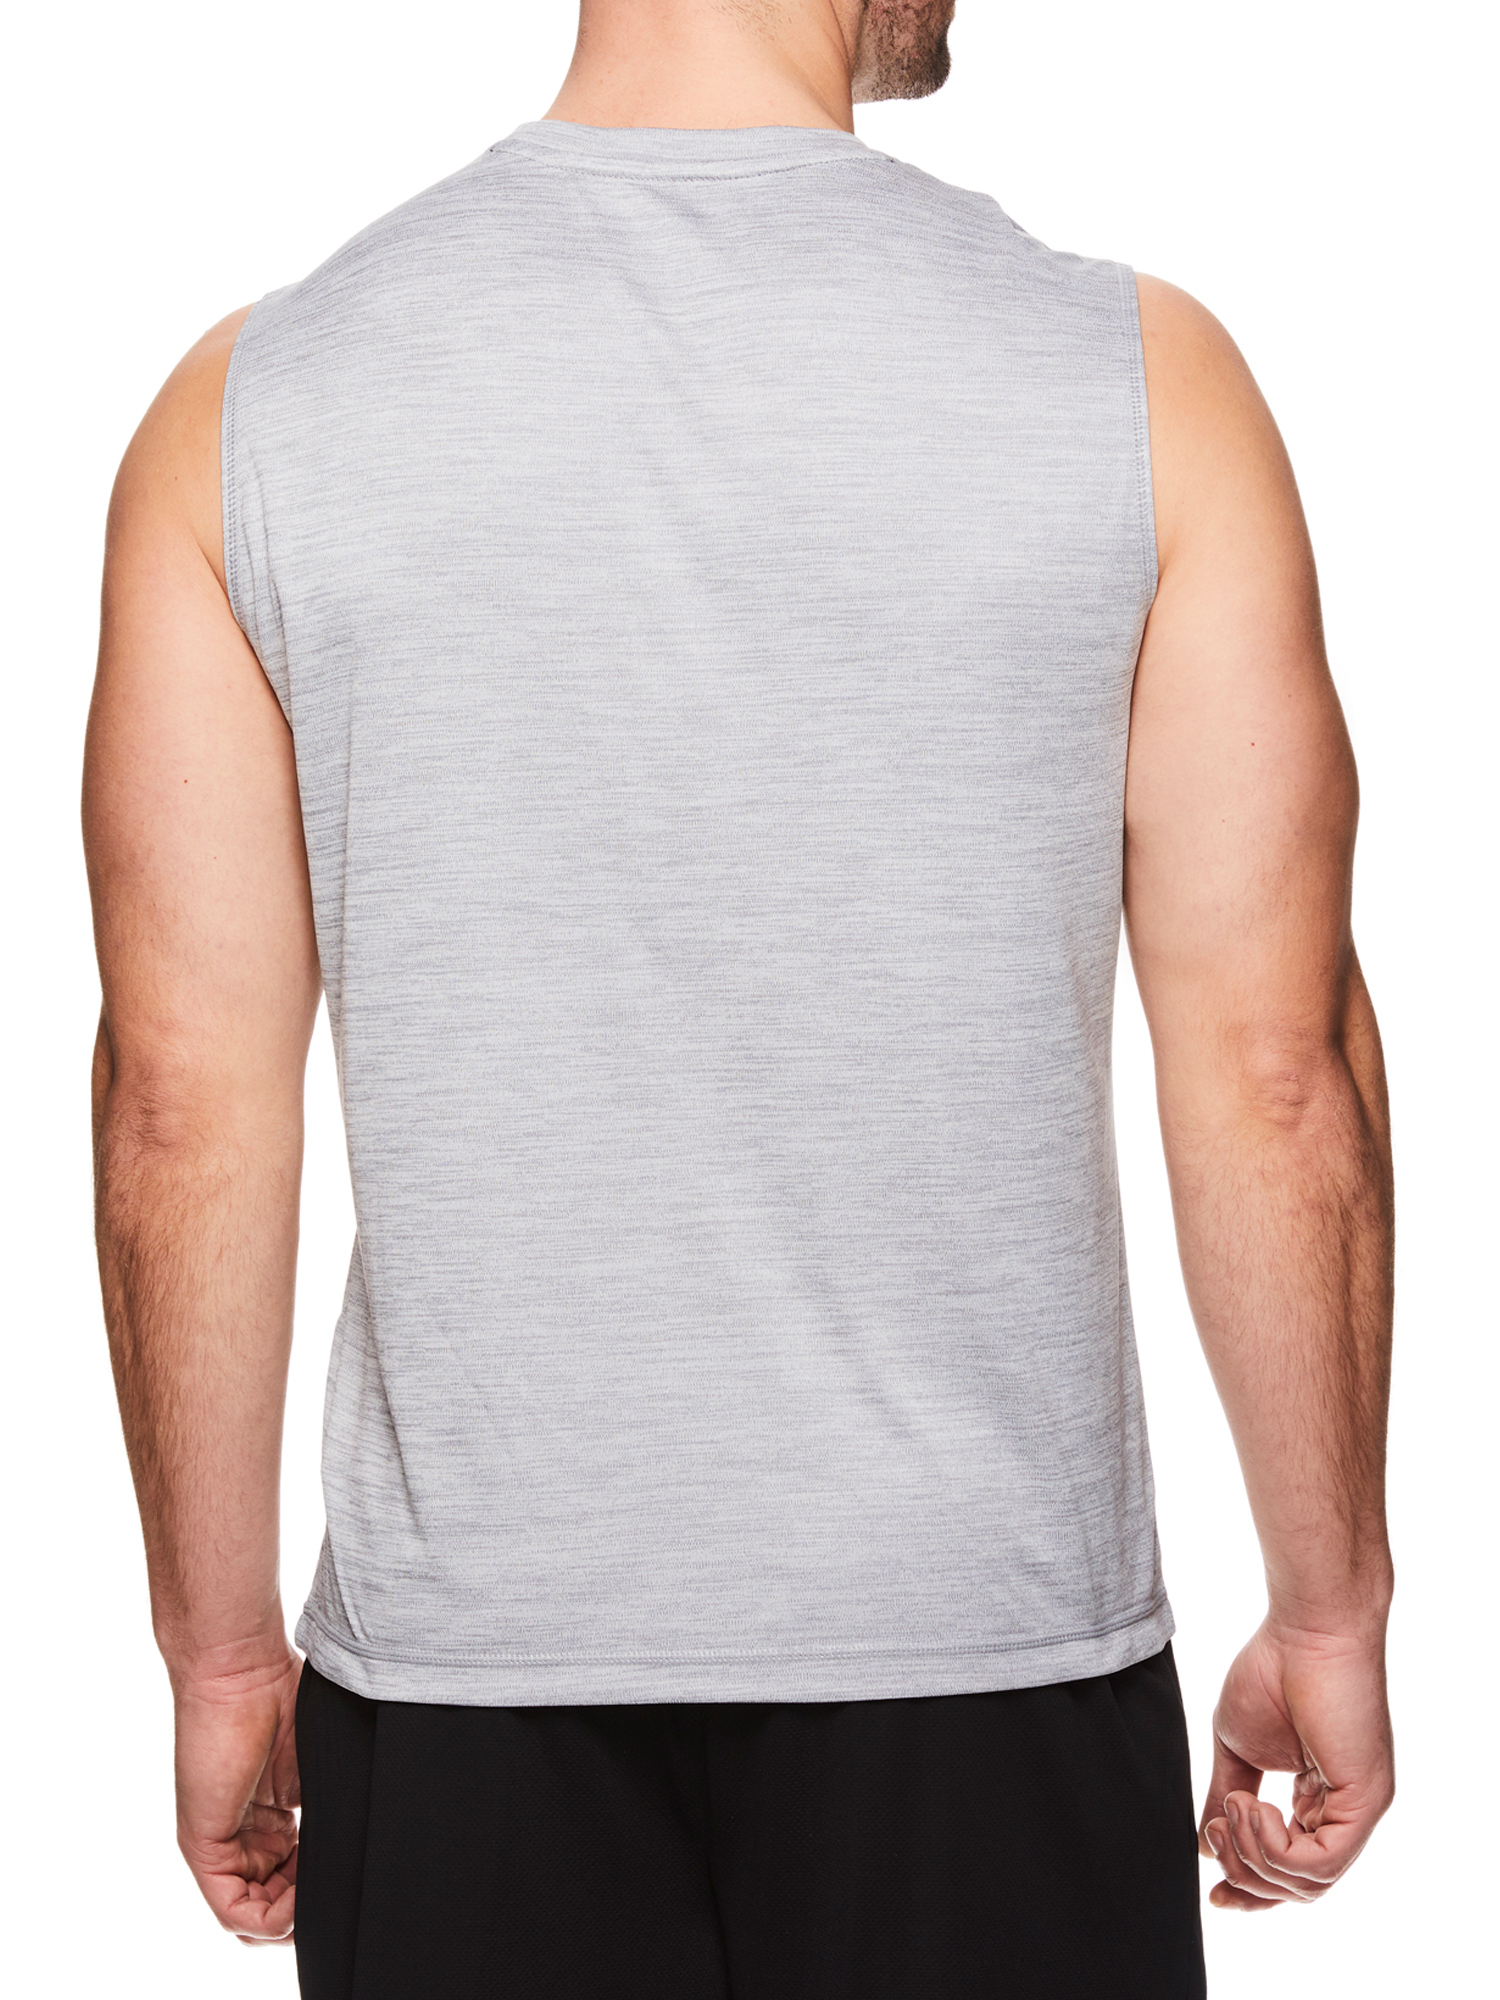 Reebok Men's Charger Muscle Tank Top - image 2 of 4